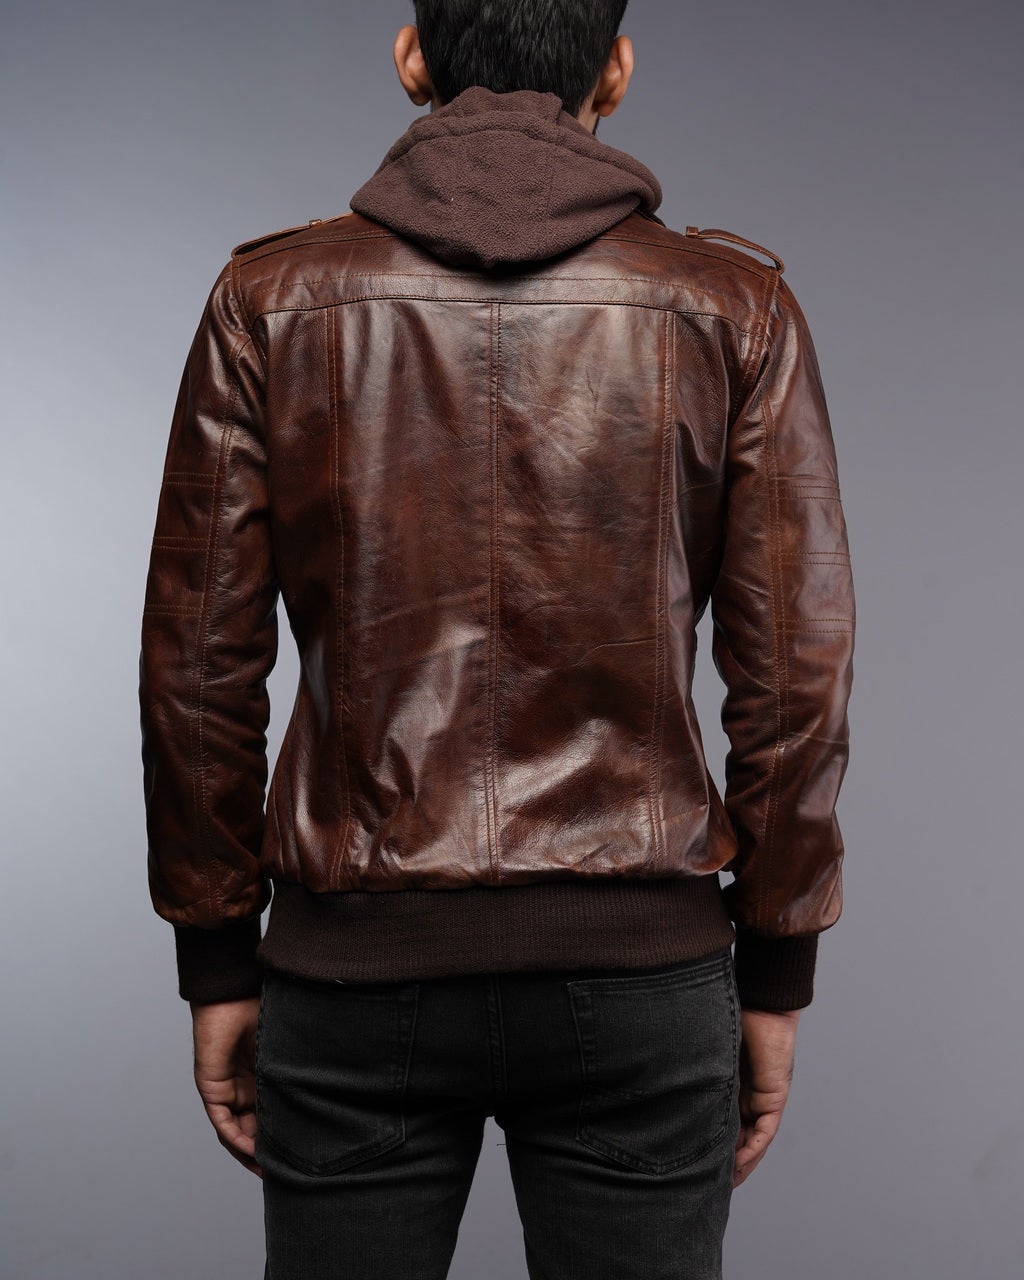 Men's Distressed Brown Leather ‘Utility Pocket’ Vented Jacket with  Removable Hoodie